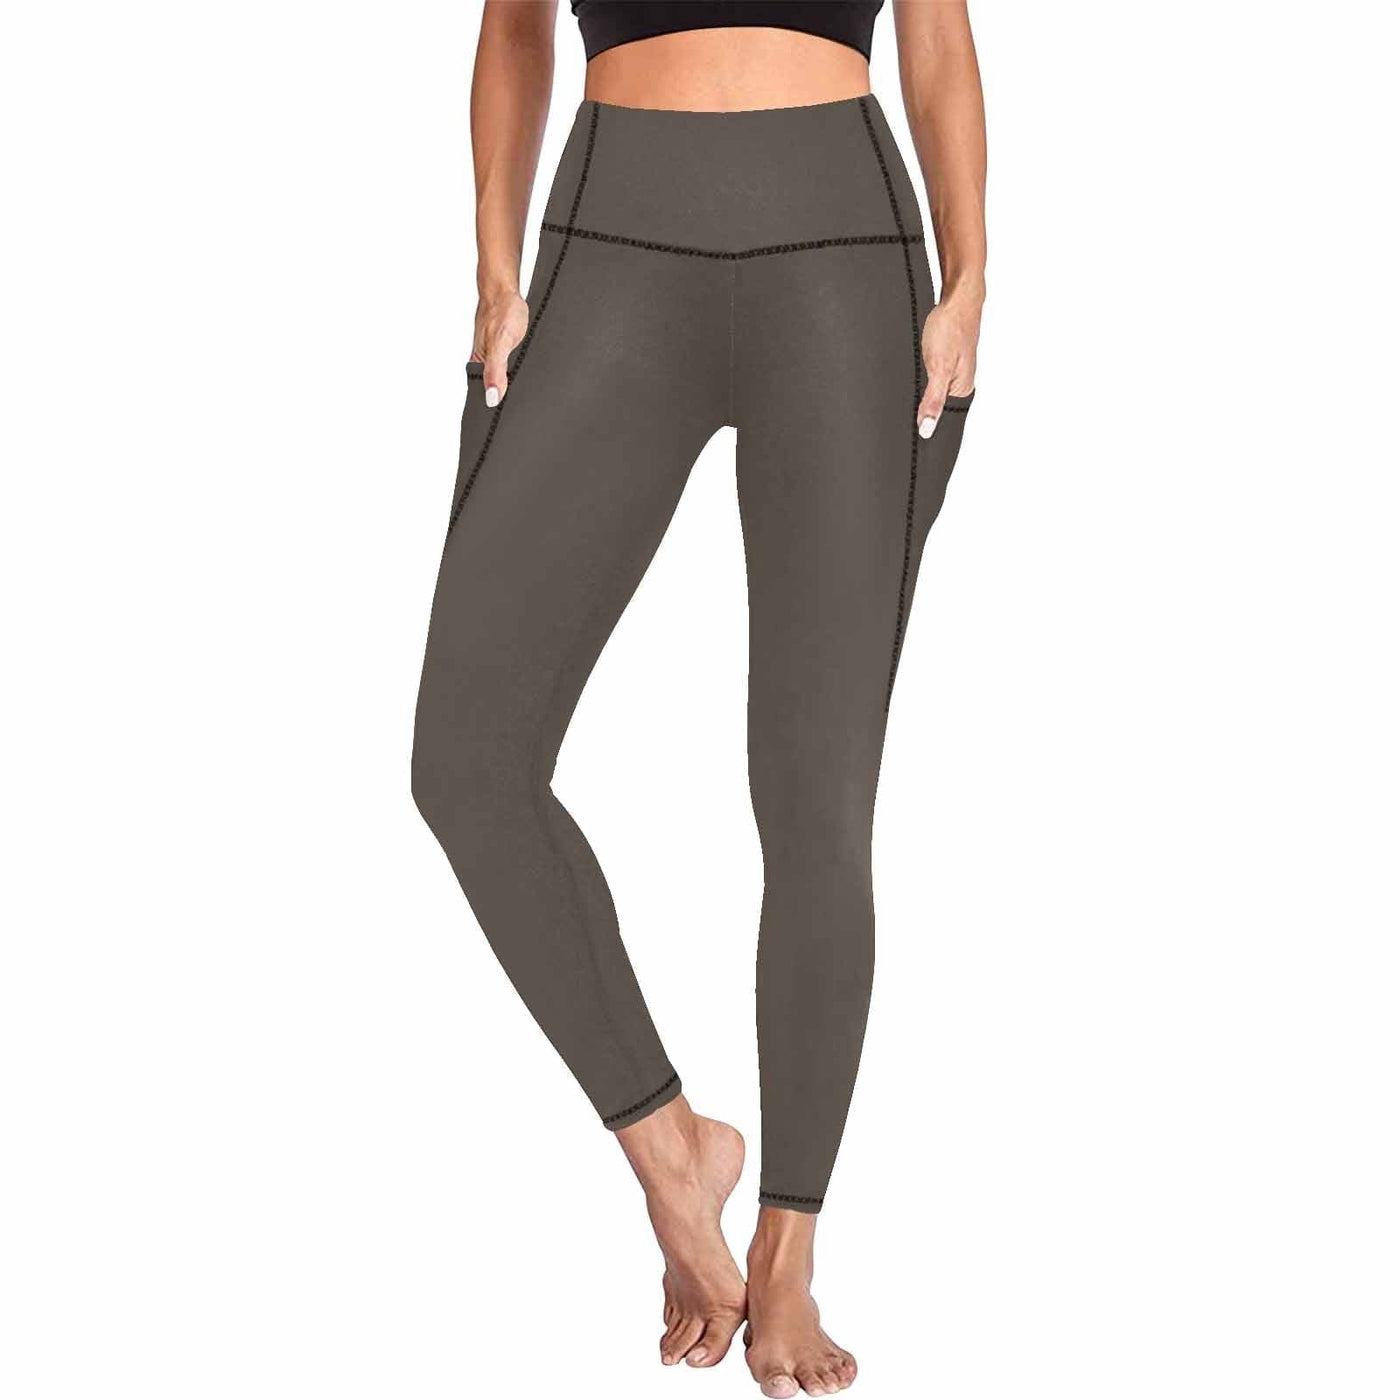 Womens Leggings With Pockets - Fitness Pants / Dark Taupe Brown - Womens